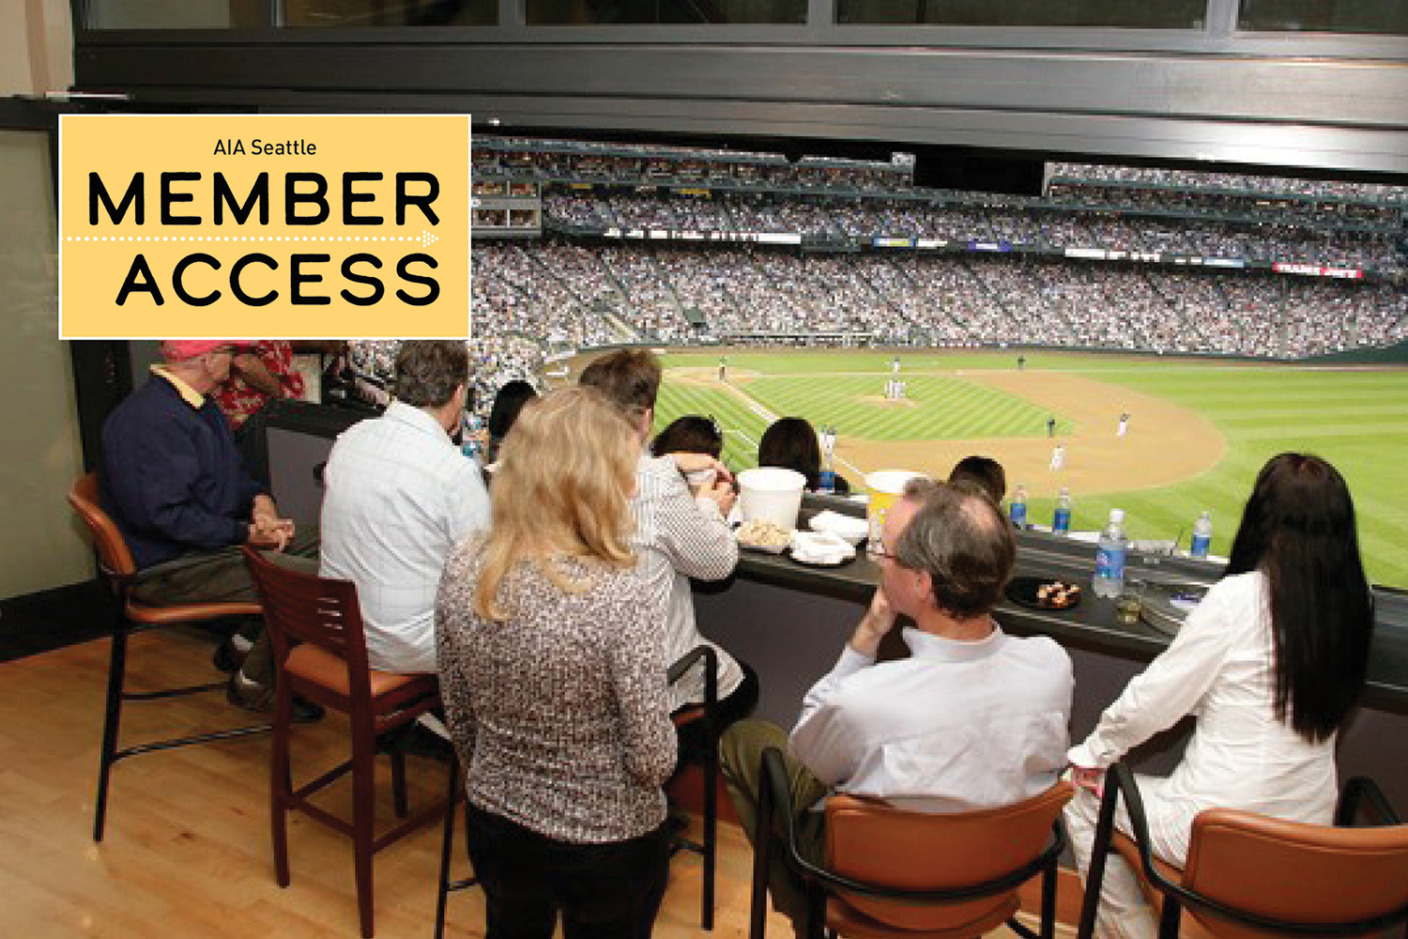 Join Copiers Northwest, our new Corporate Allied Partner, for an exclusive members only Mariners game in their luxury suite.